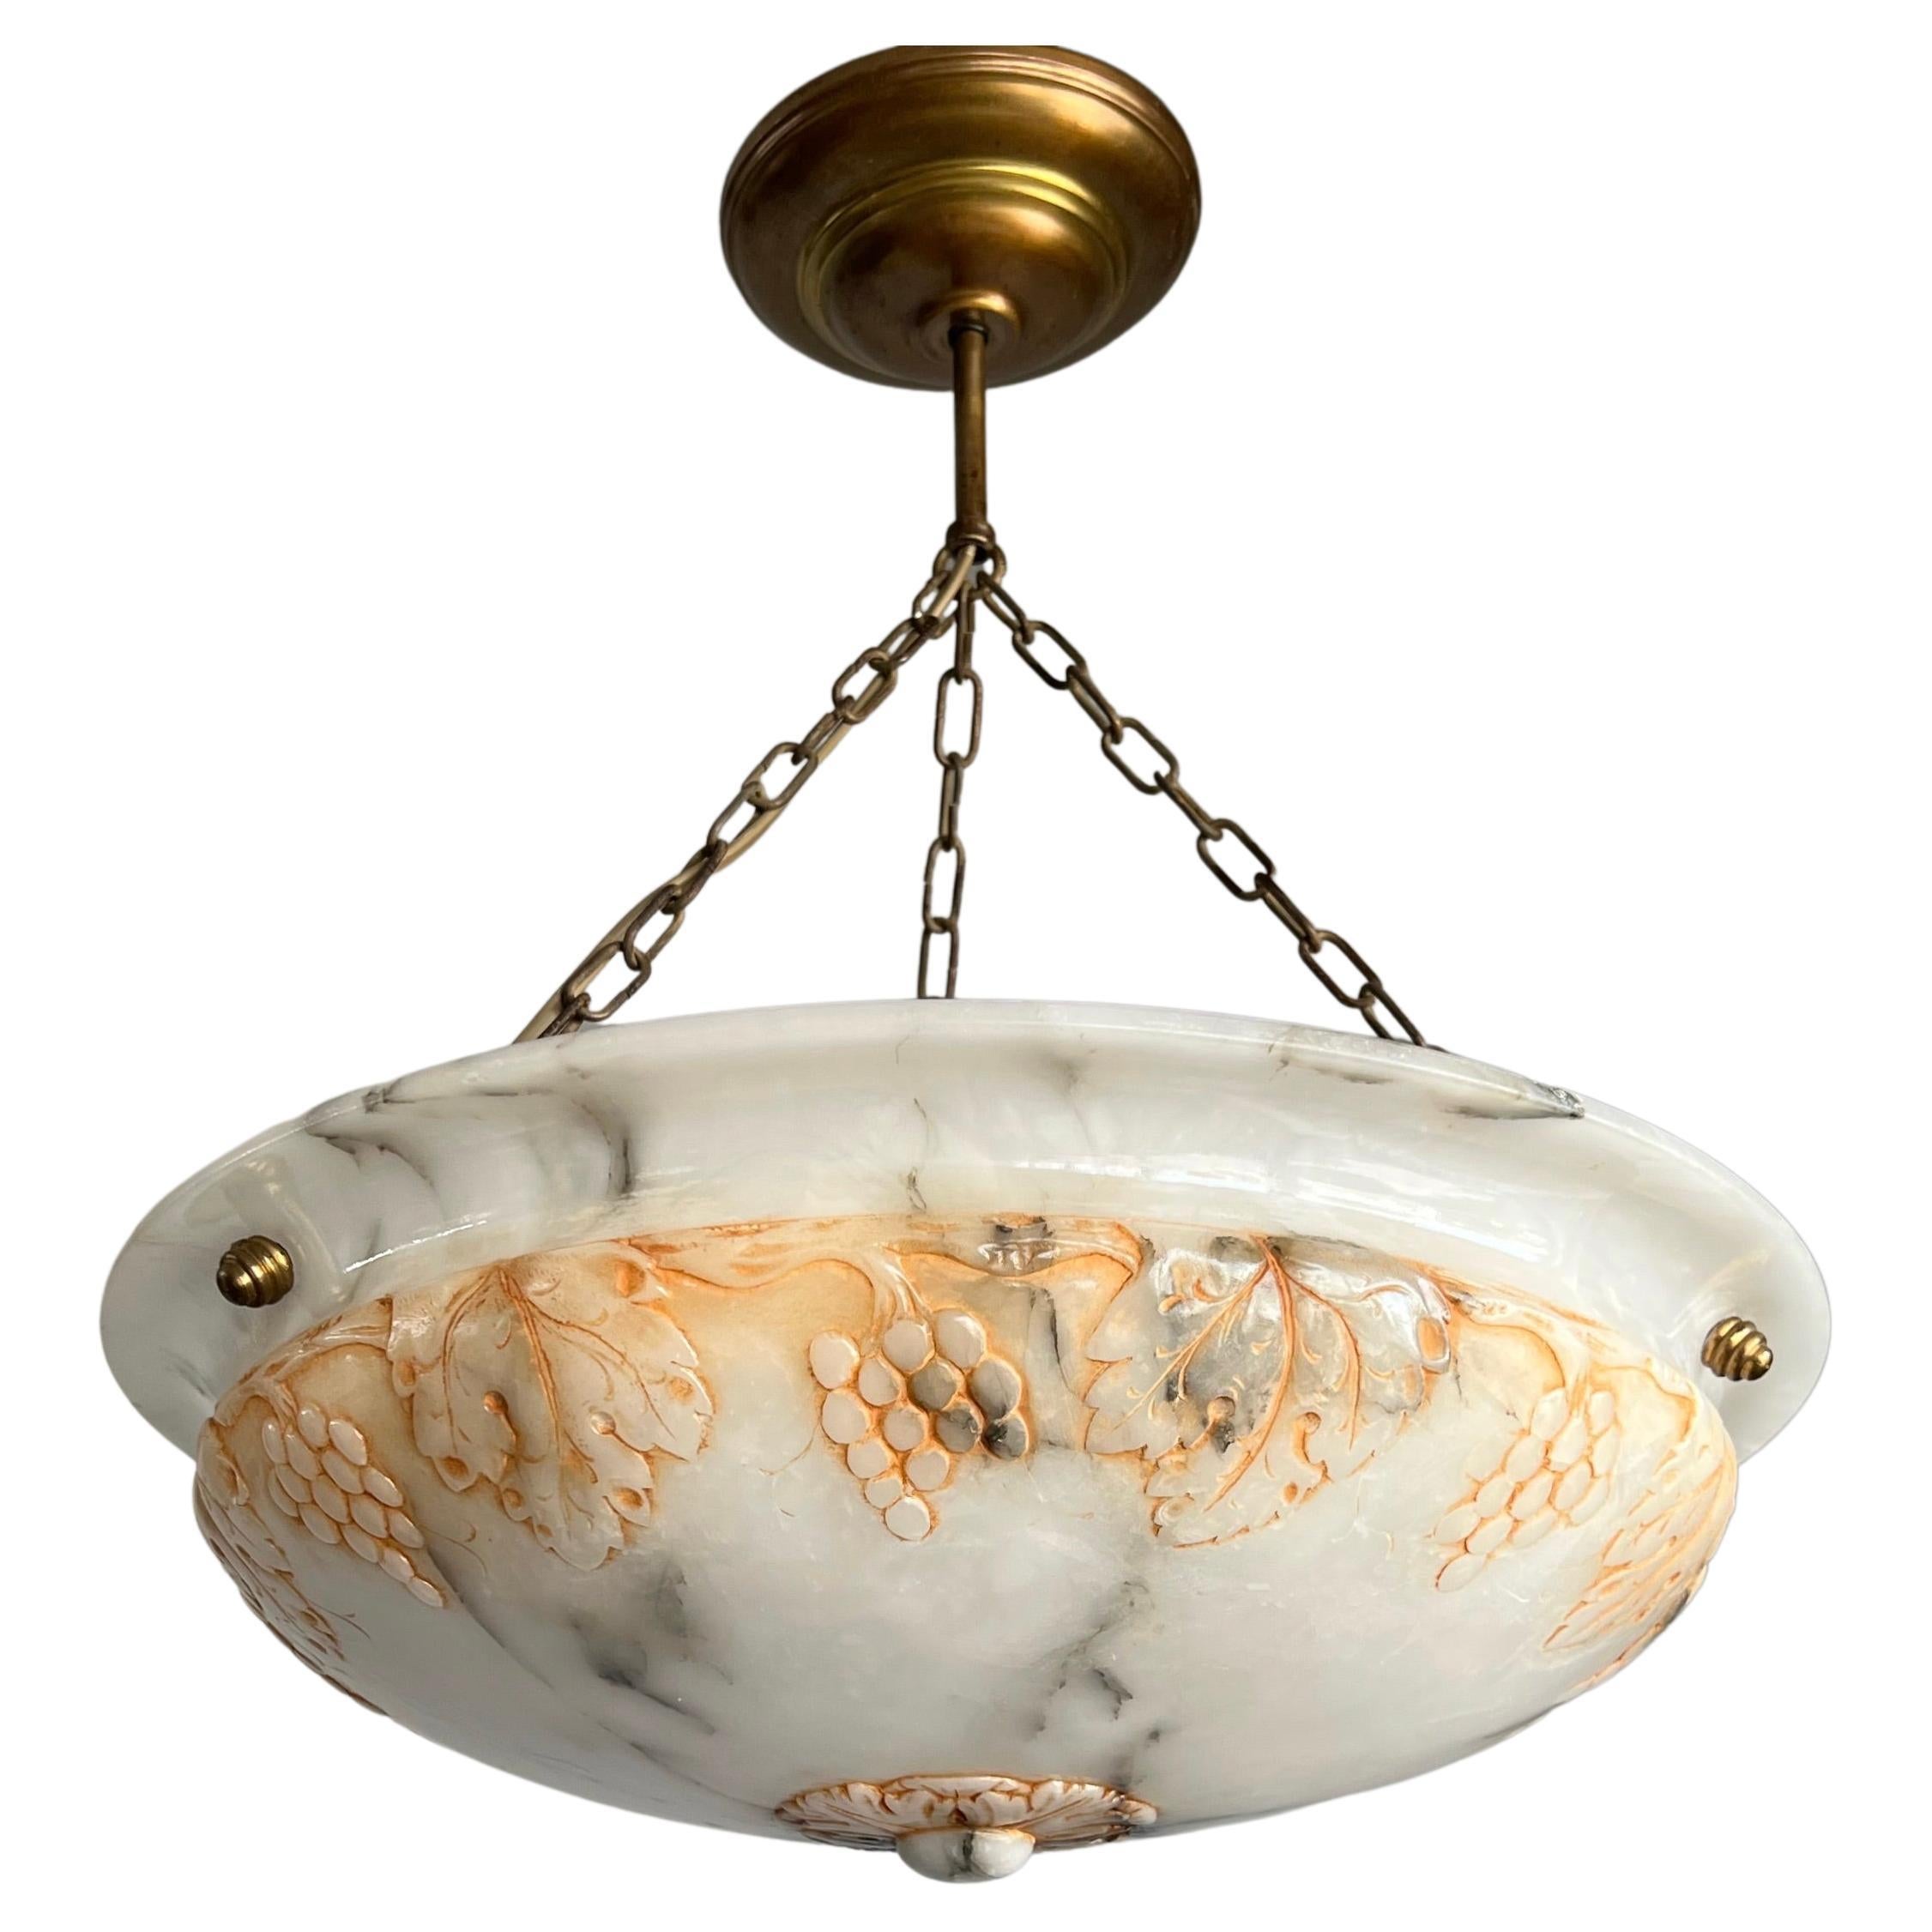 Top Class, Arts & Crafts era Chandelier with an Unique Carved Alabaster Shade 